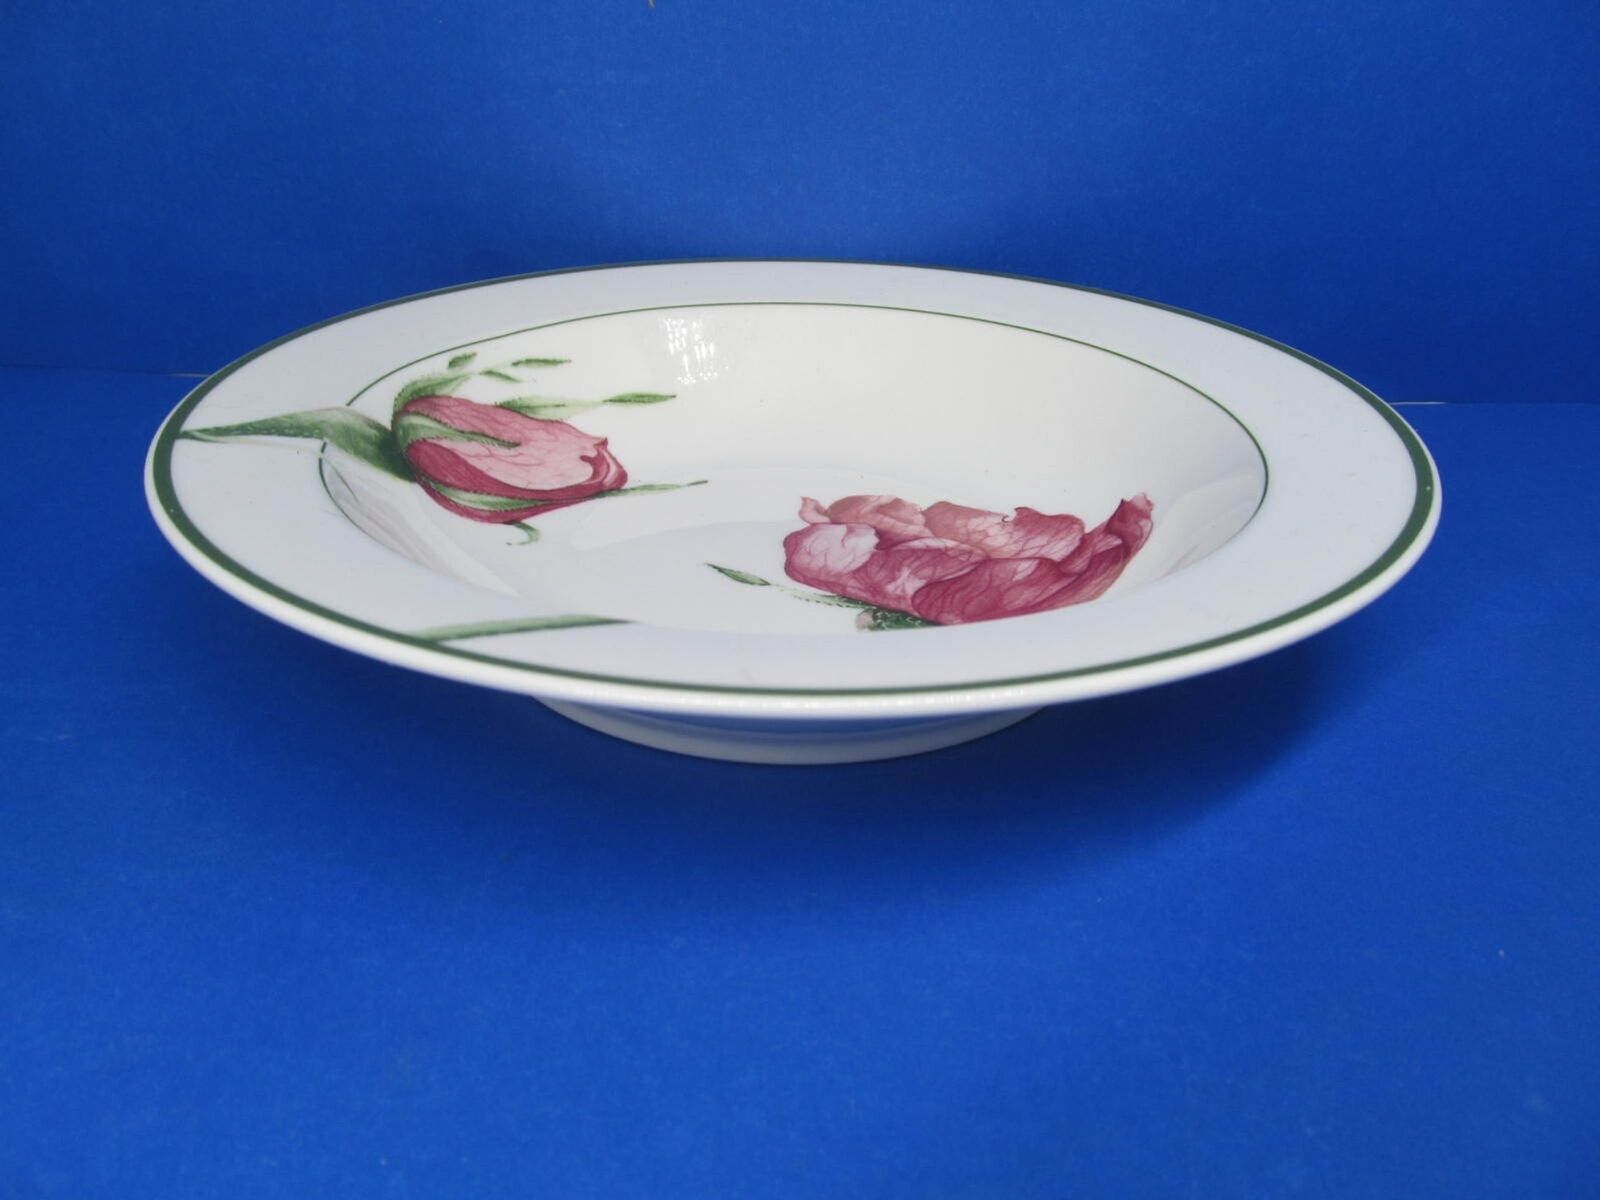 Primary image for Villeroy And Boch Flora "Wild Rose" 7 7/8 Inch Rimmed Cereal Bowl 